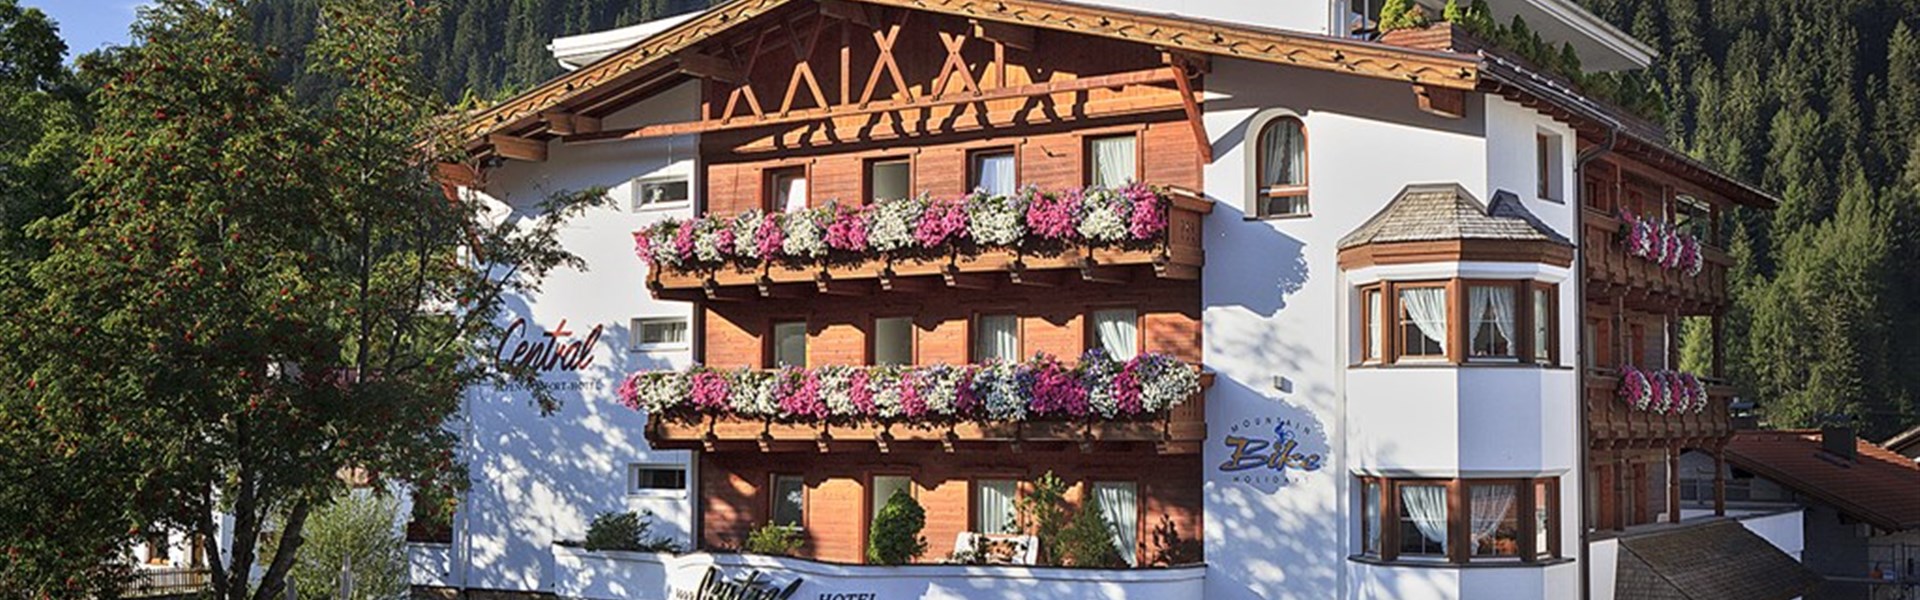 Marco Polo - Alpen-Comfort Hotel Central (S) - 